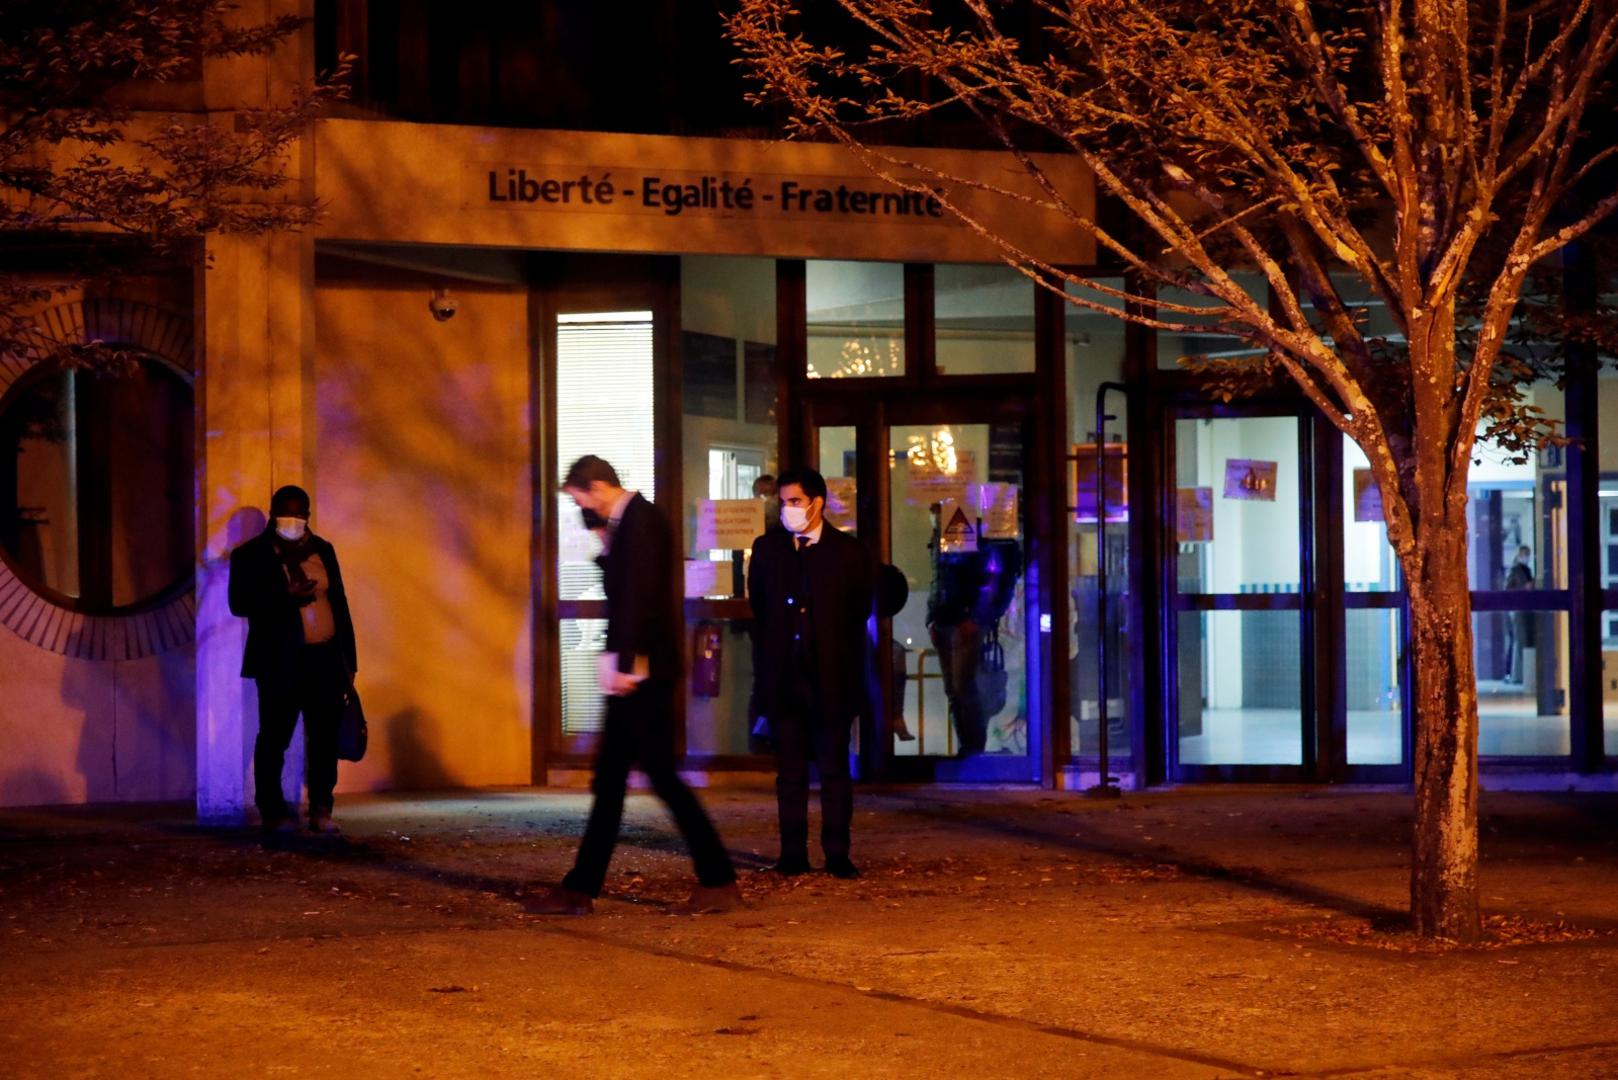 Stabbing attack in the Paris suburb of Conflans St Honorine People are seen outside an entrance area near the scene of a stabbing attack in the Paris suburb of Conflans St Honorine, France, October 16, 2020. REUTERS/Charles Platiau CHARLES PLATIAU